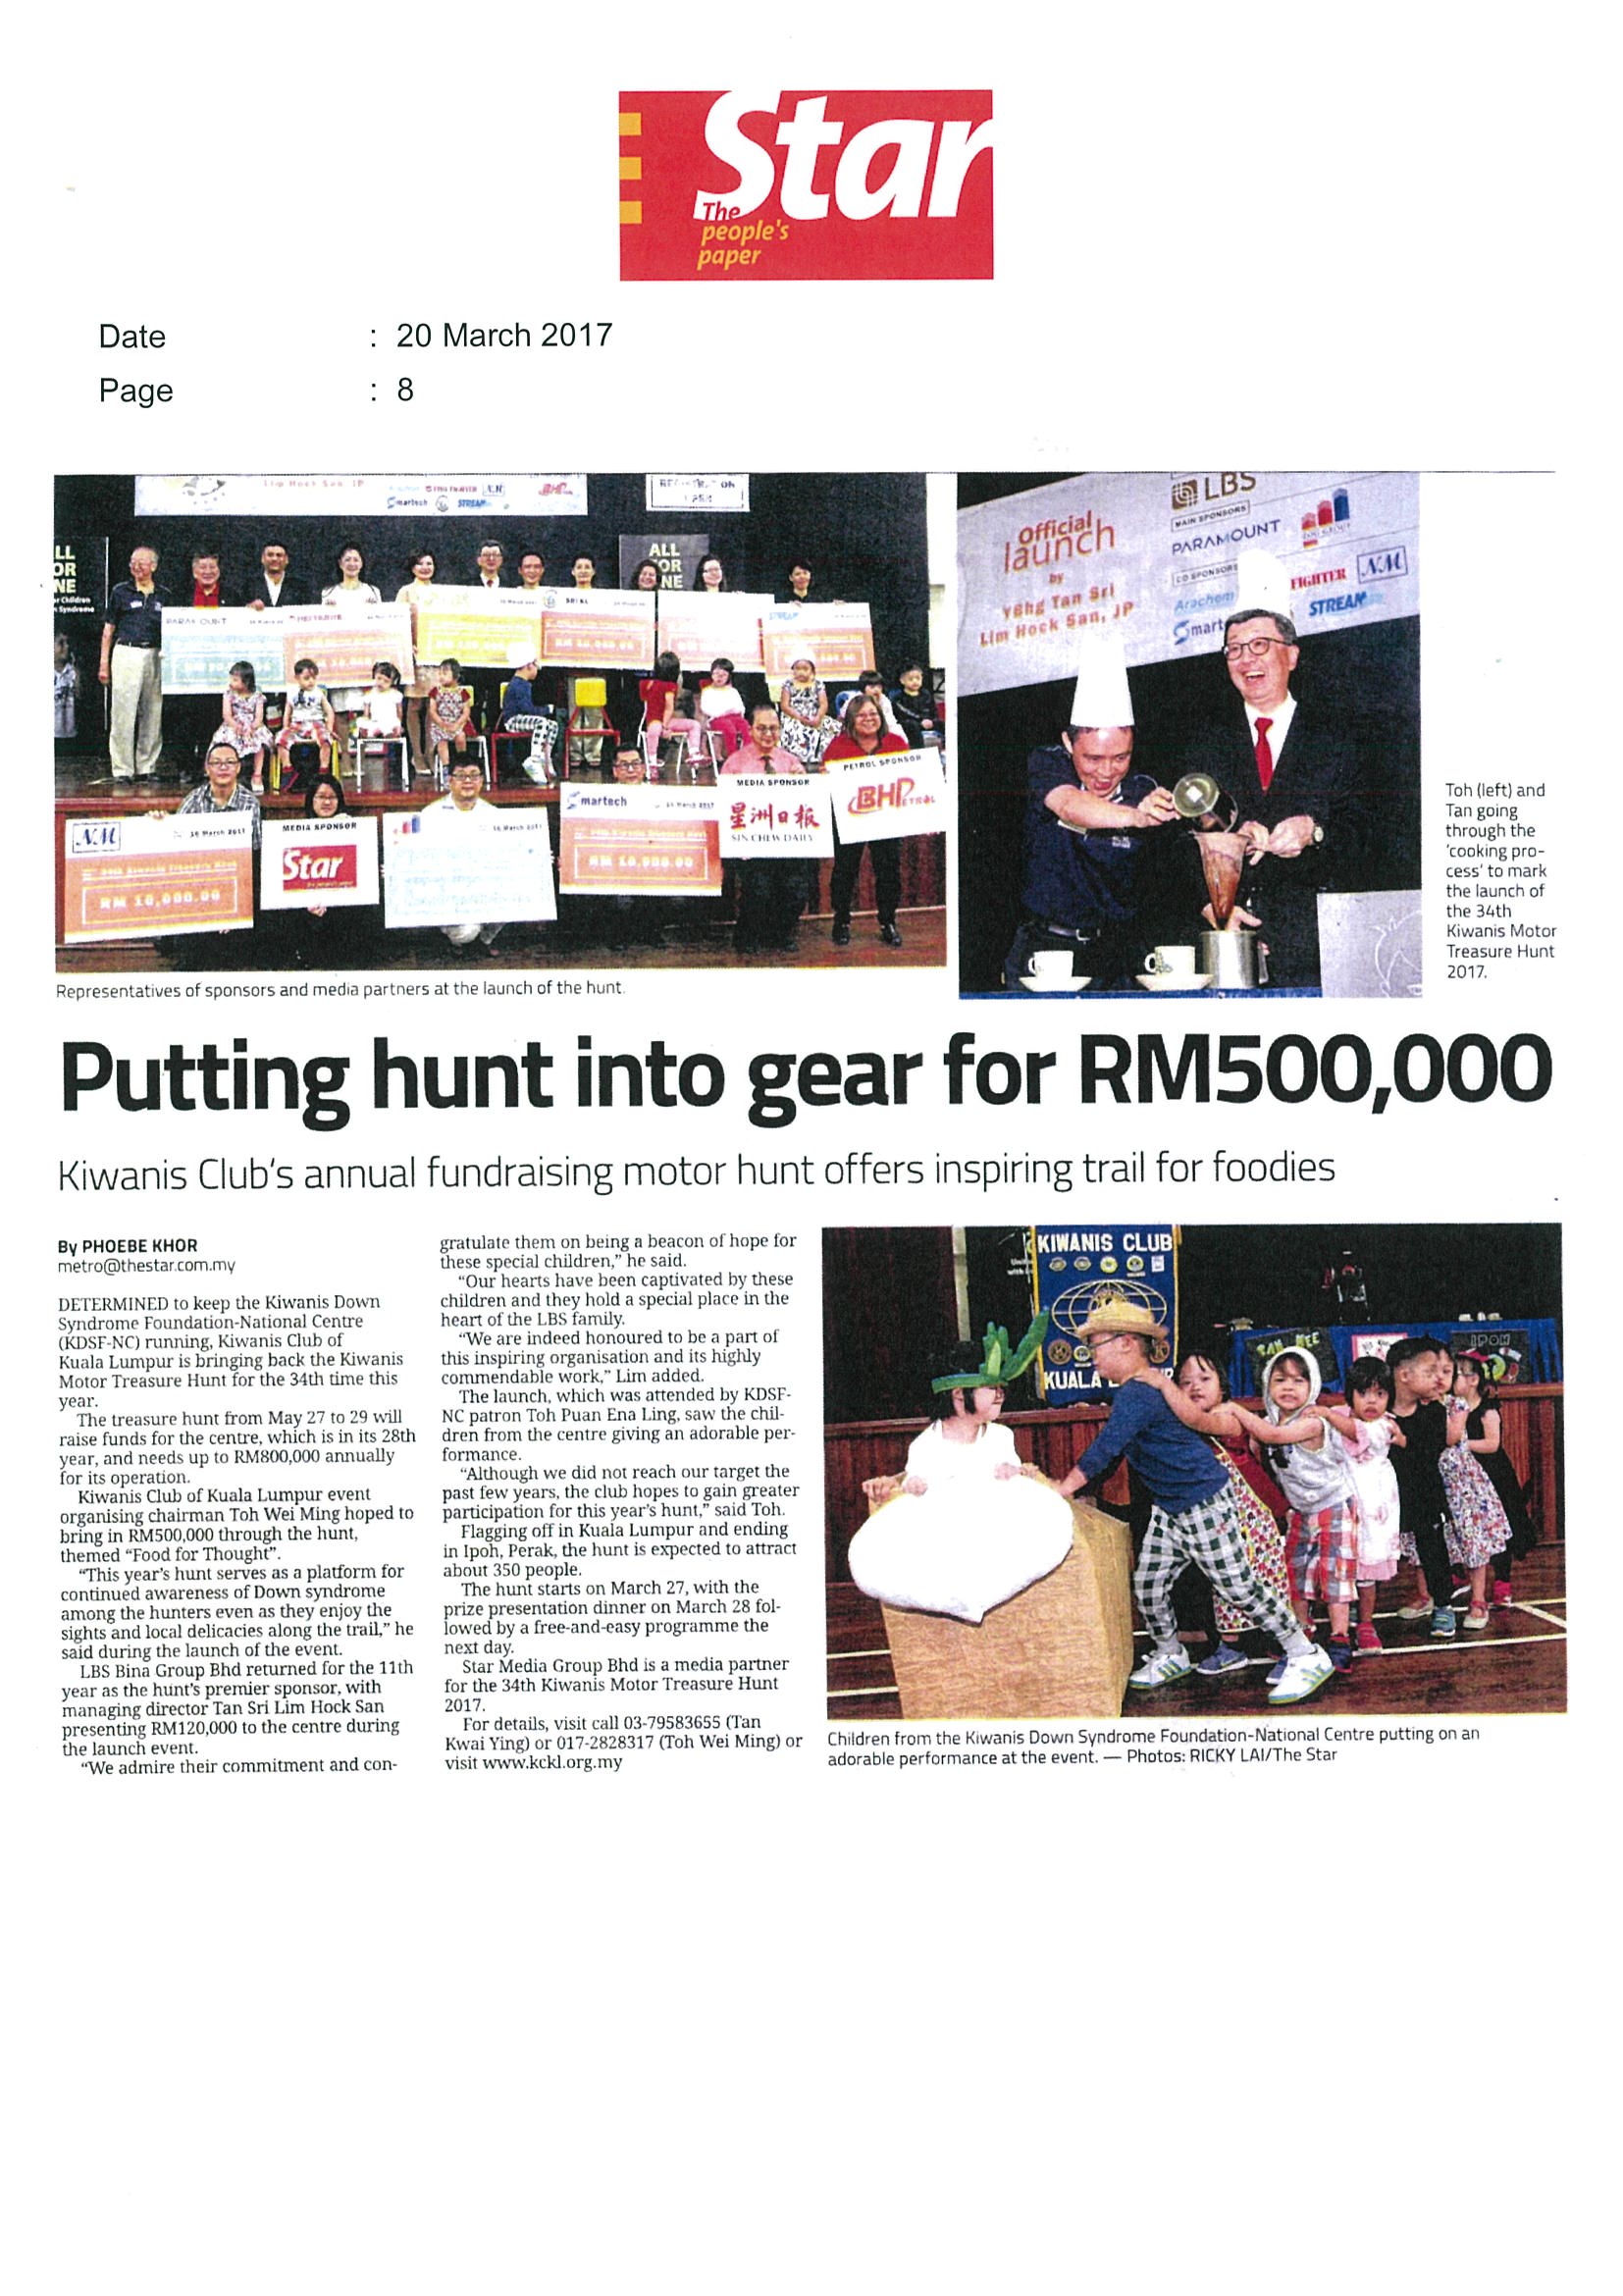 2017.03.20 The Star – Putting hunt into gear for RM500,000